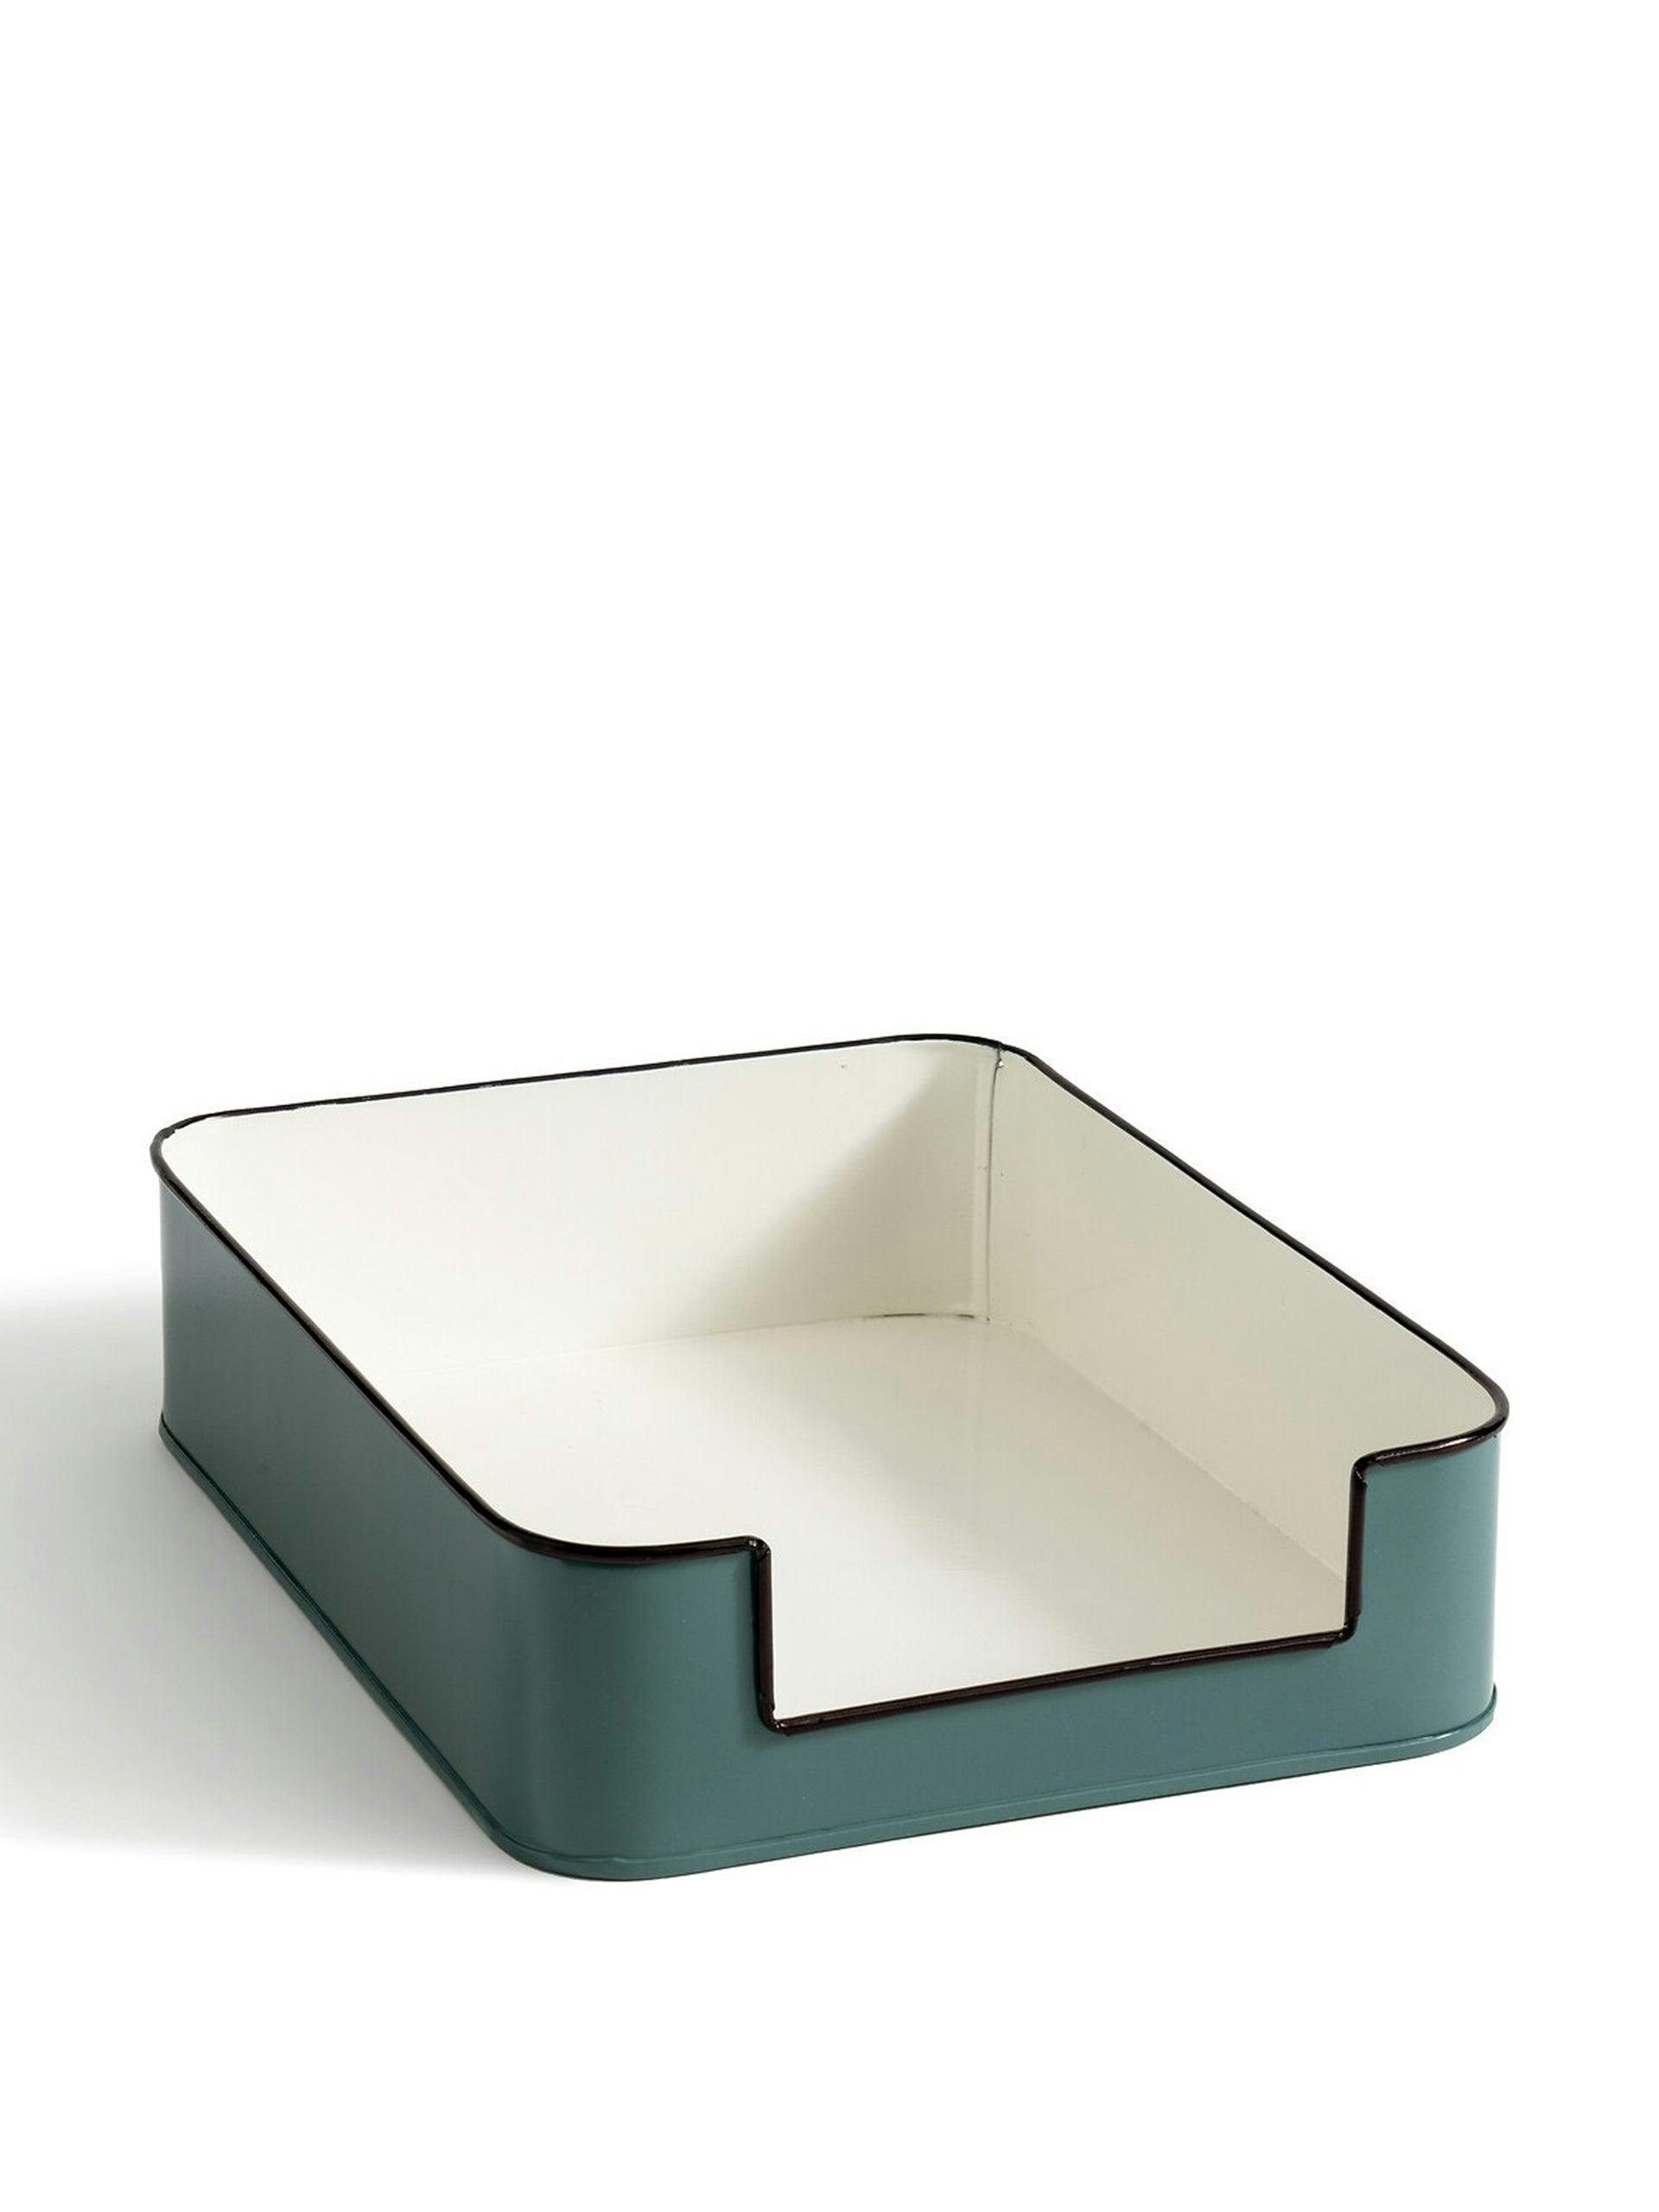 Octave metal paper tray